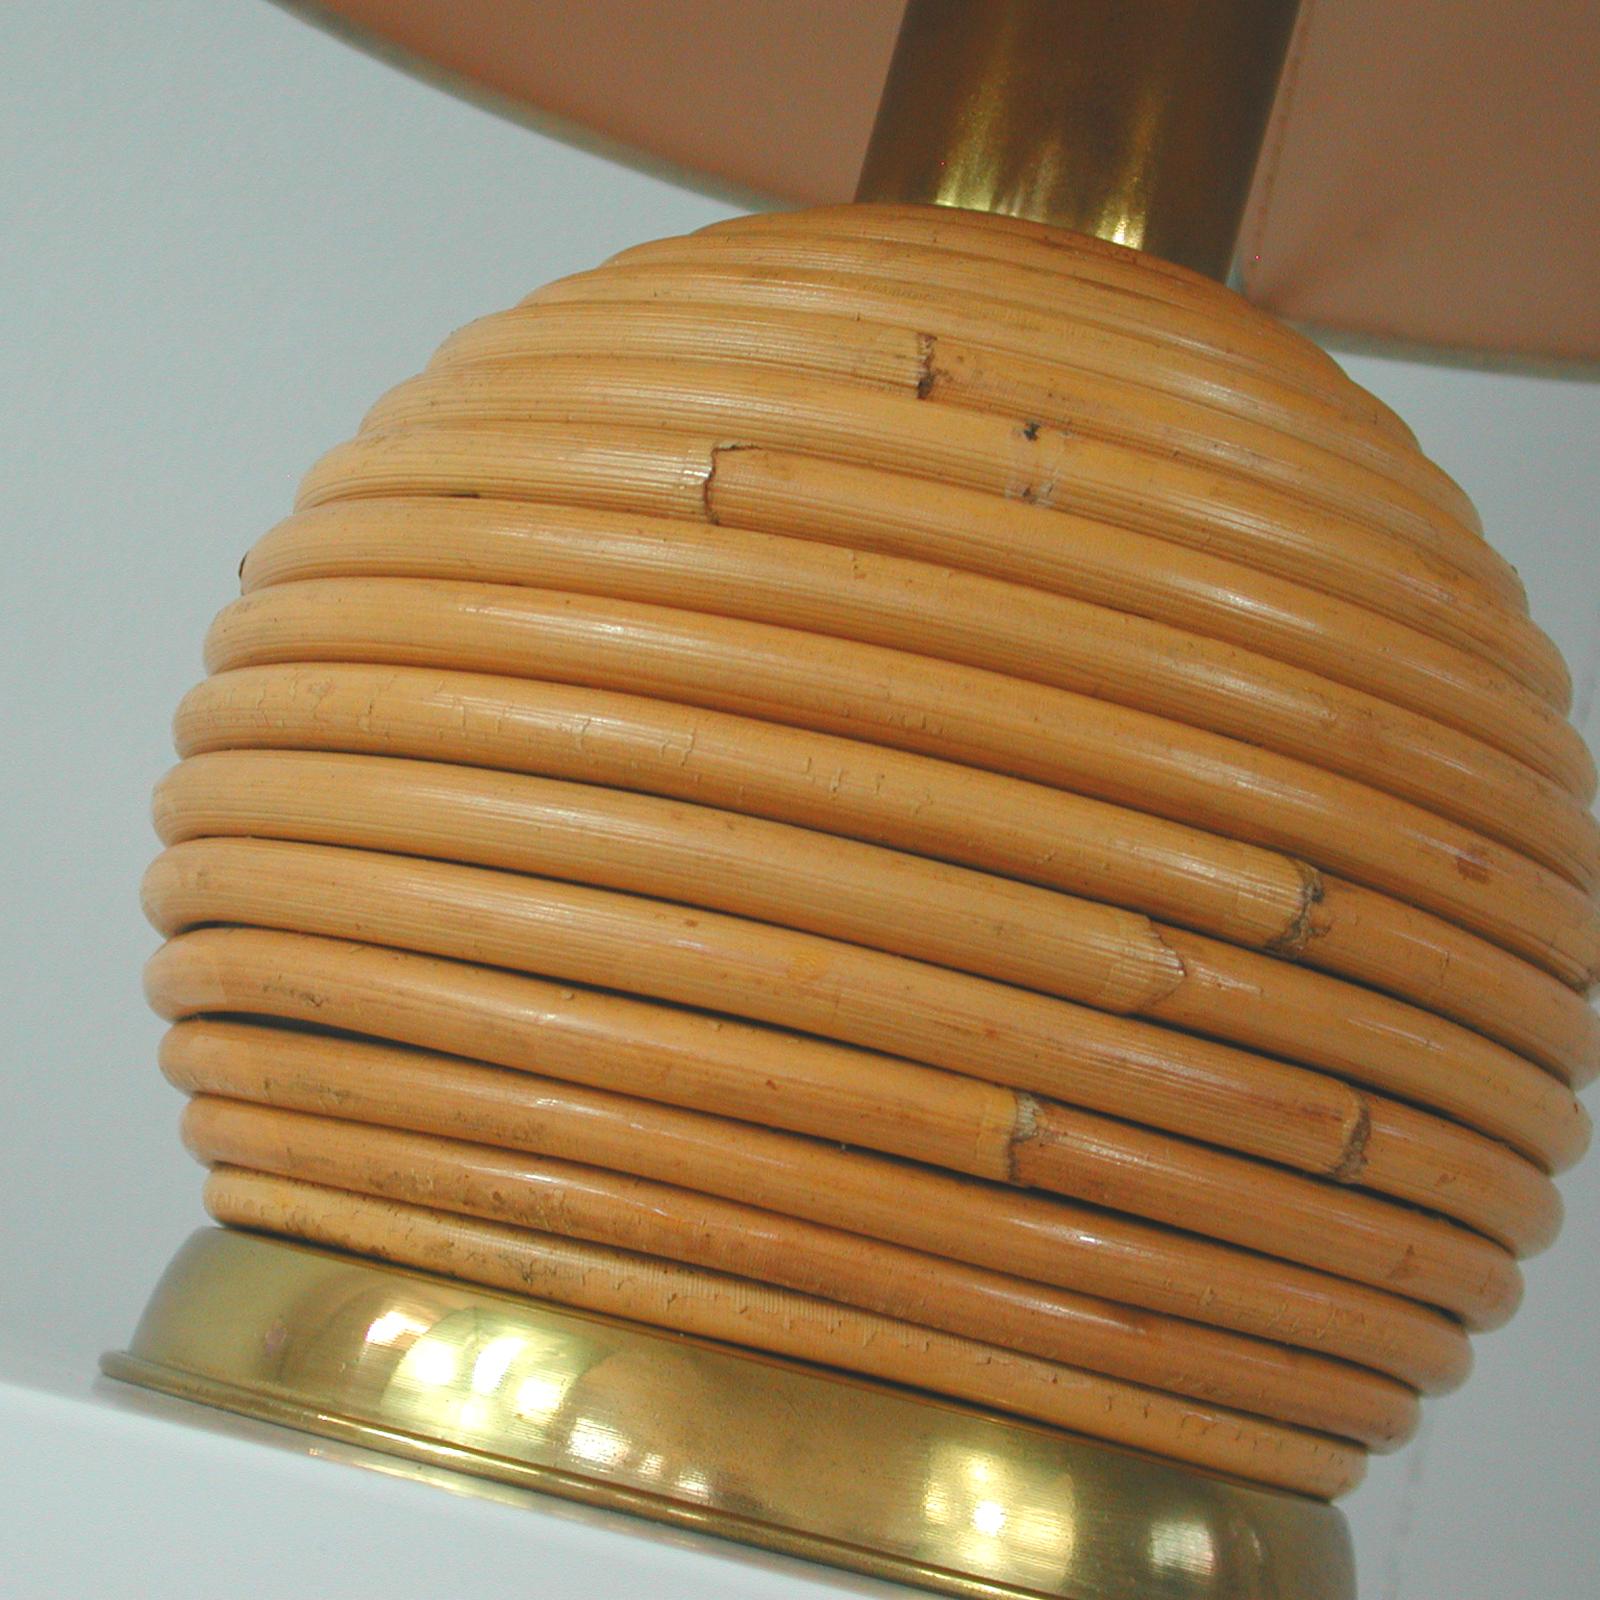 Midcentury Bamboo and Brass Globe Table Lamp, Vivai del Sud attr. Italy 1960s For Sale 2